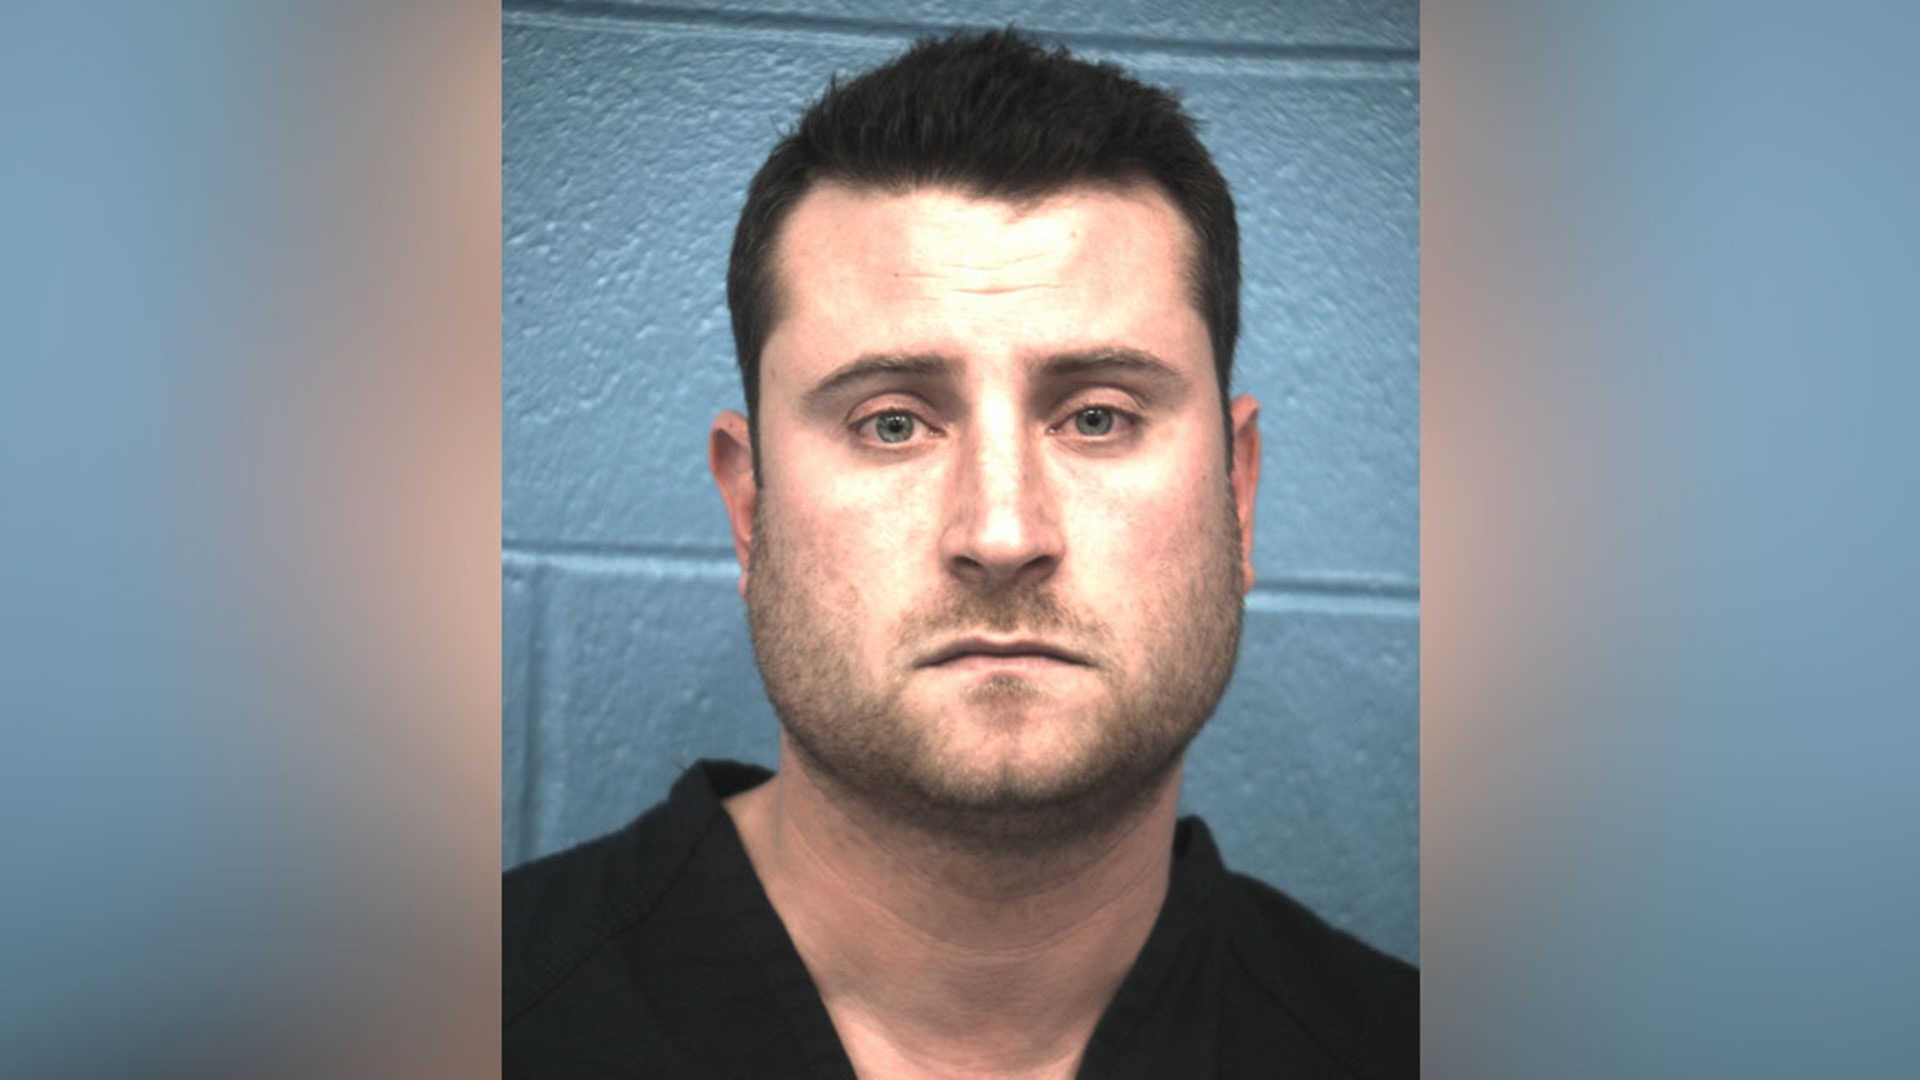 Austin officer charged, fired following DWI arrest ‘He’s gonna kill